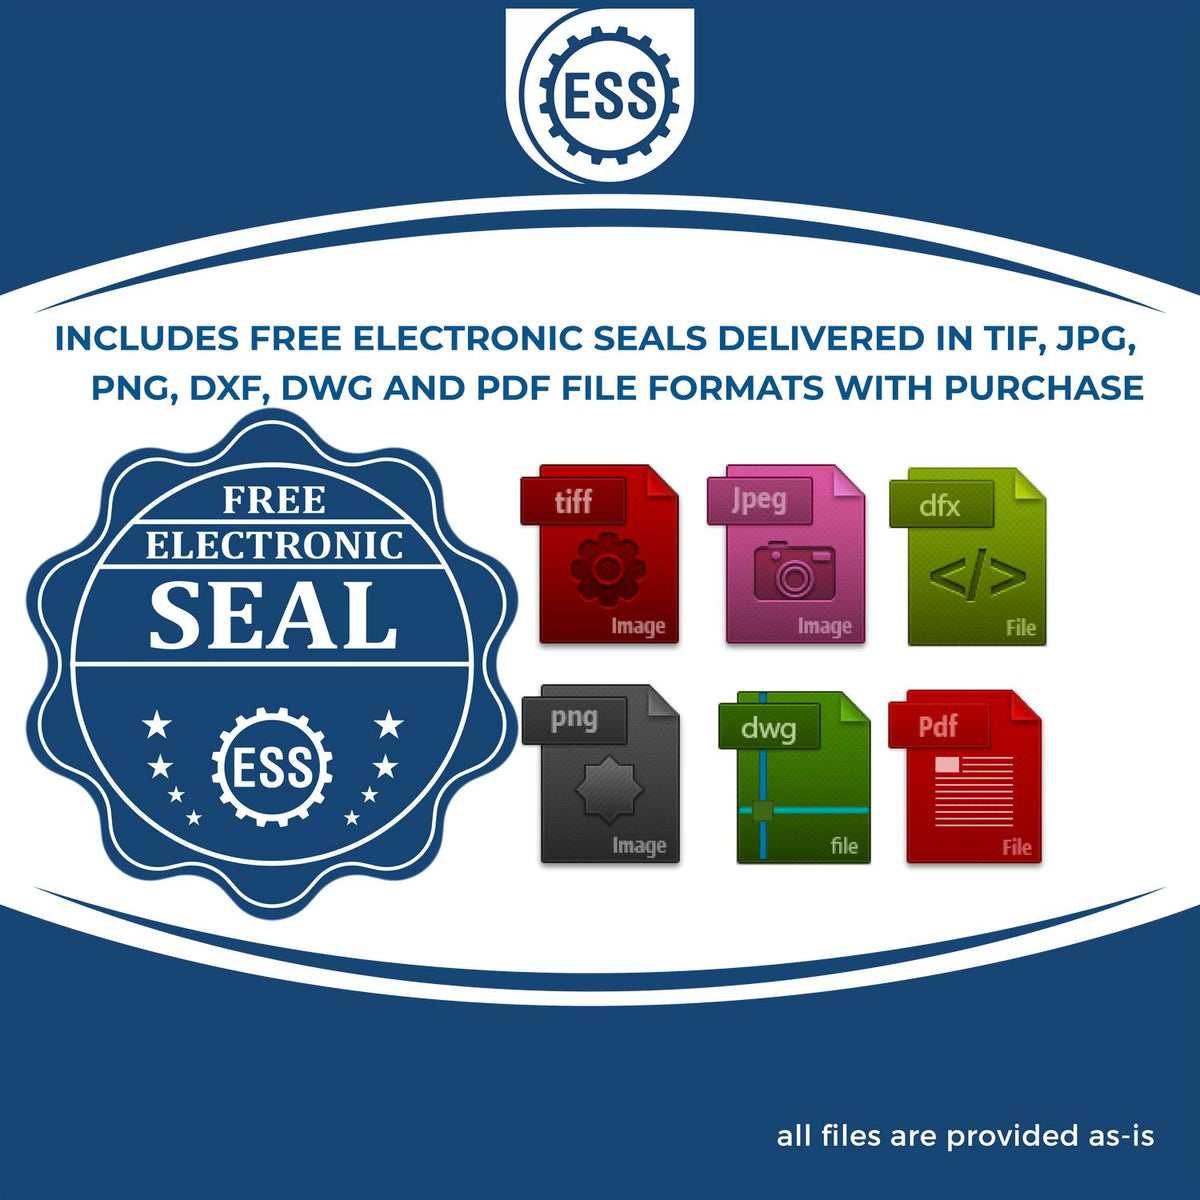 An infographic for the free electronic seal for the Premium MaxLight Pre-Inked Connecticut Geology Stamp illustrating the different file type icons such as DXF, DWG, TIF, JPG and PNG.